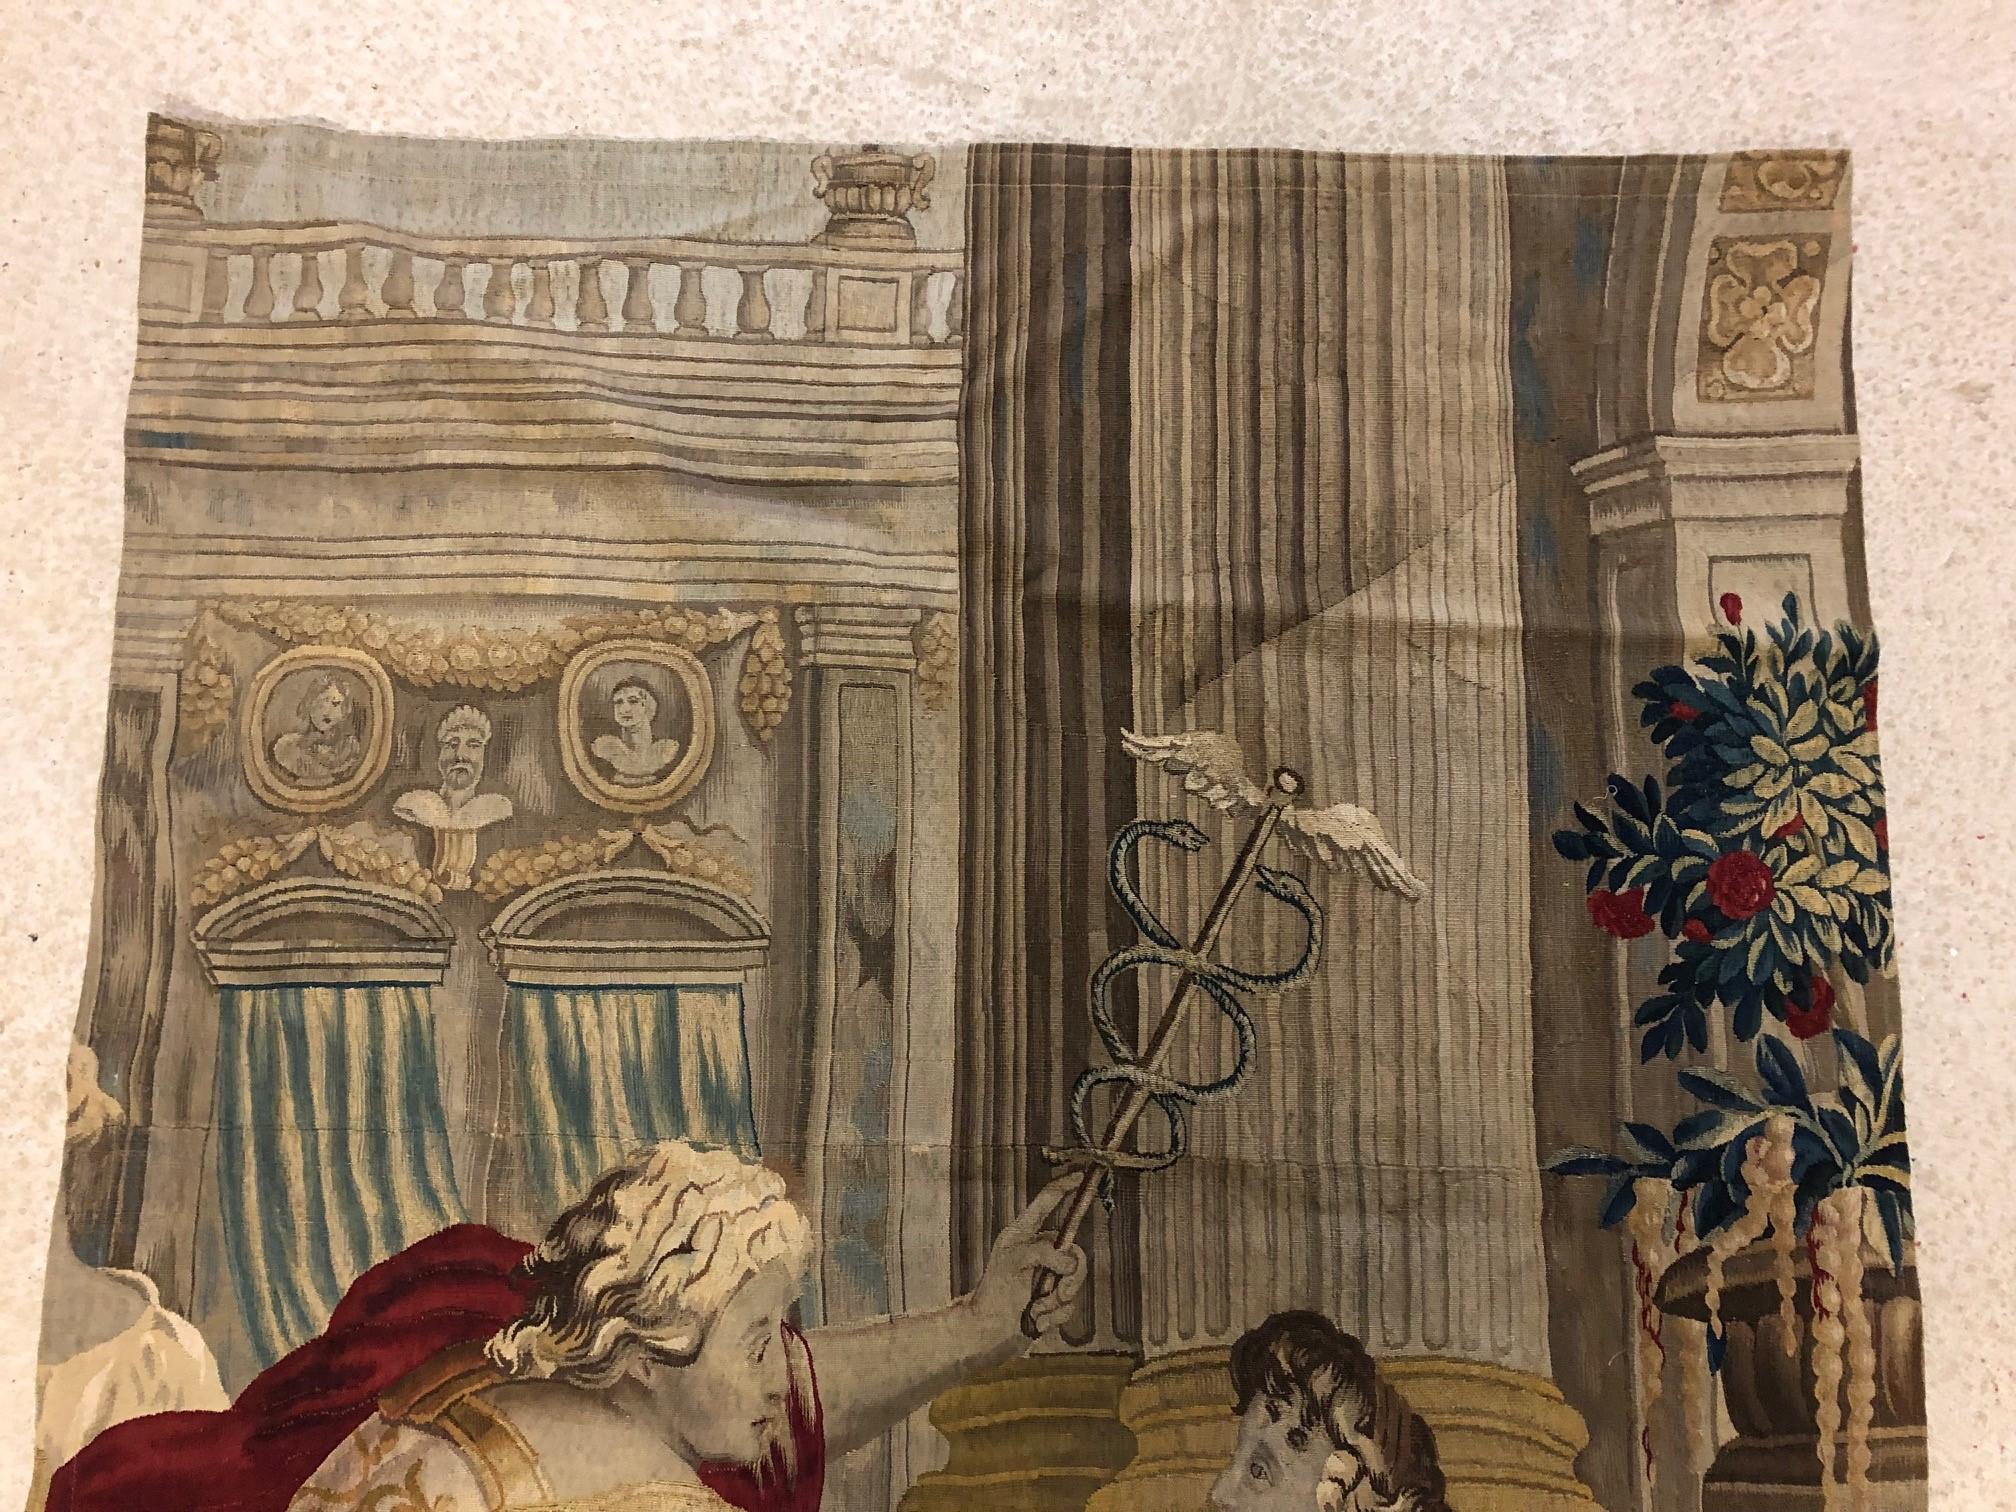 Beauvais tapestry 18th century in excellent condition, and with rare drawing precision of architectural details.
wool and silk
Theme : 